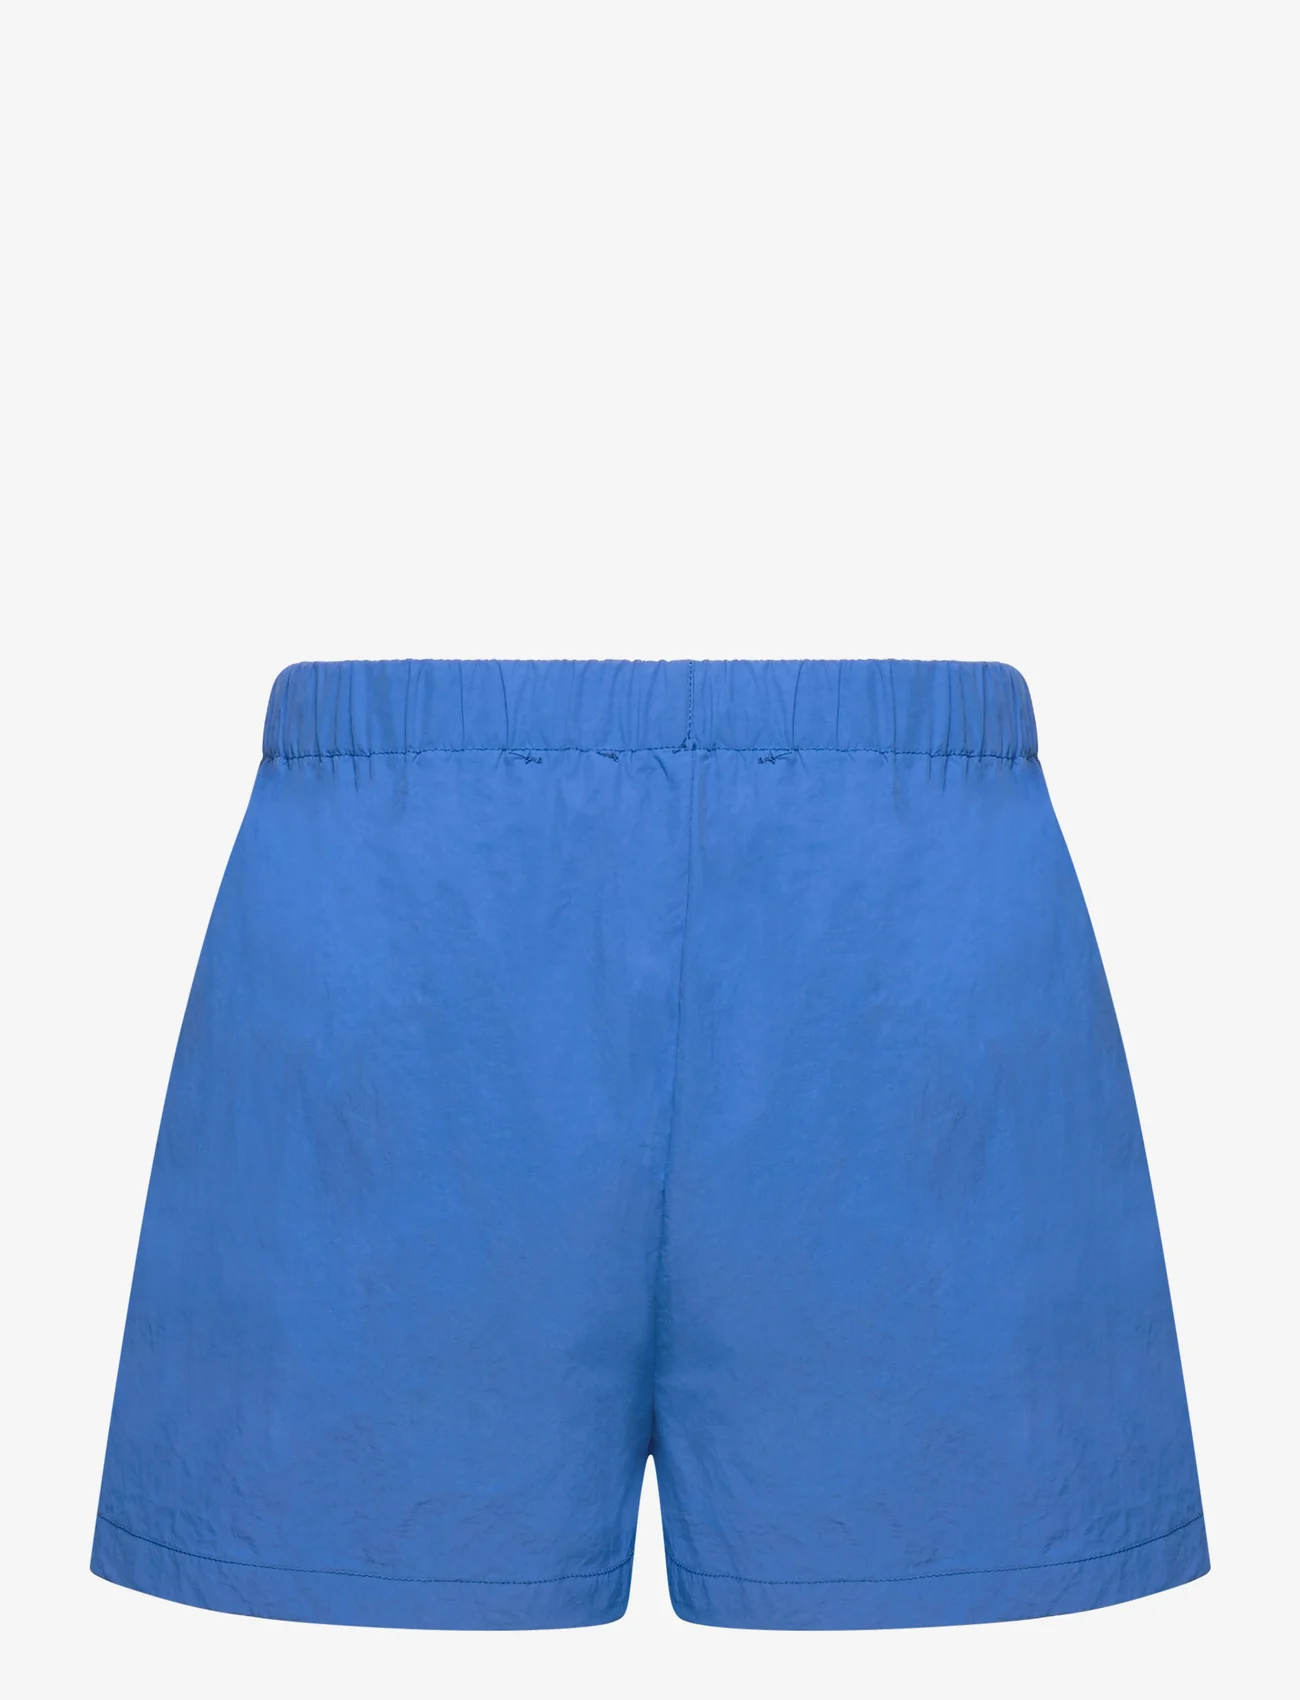 Sofie Schnoor Baby and Kids - Shorts - gode sommertilbud - bright blue - 1